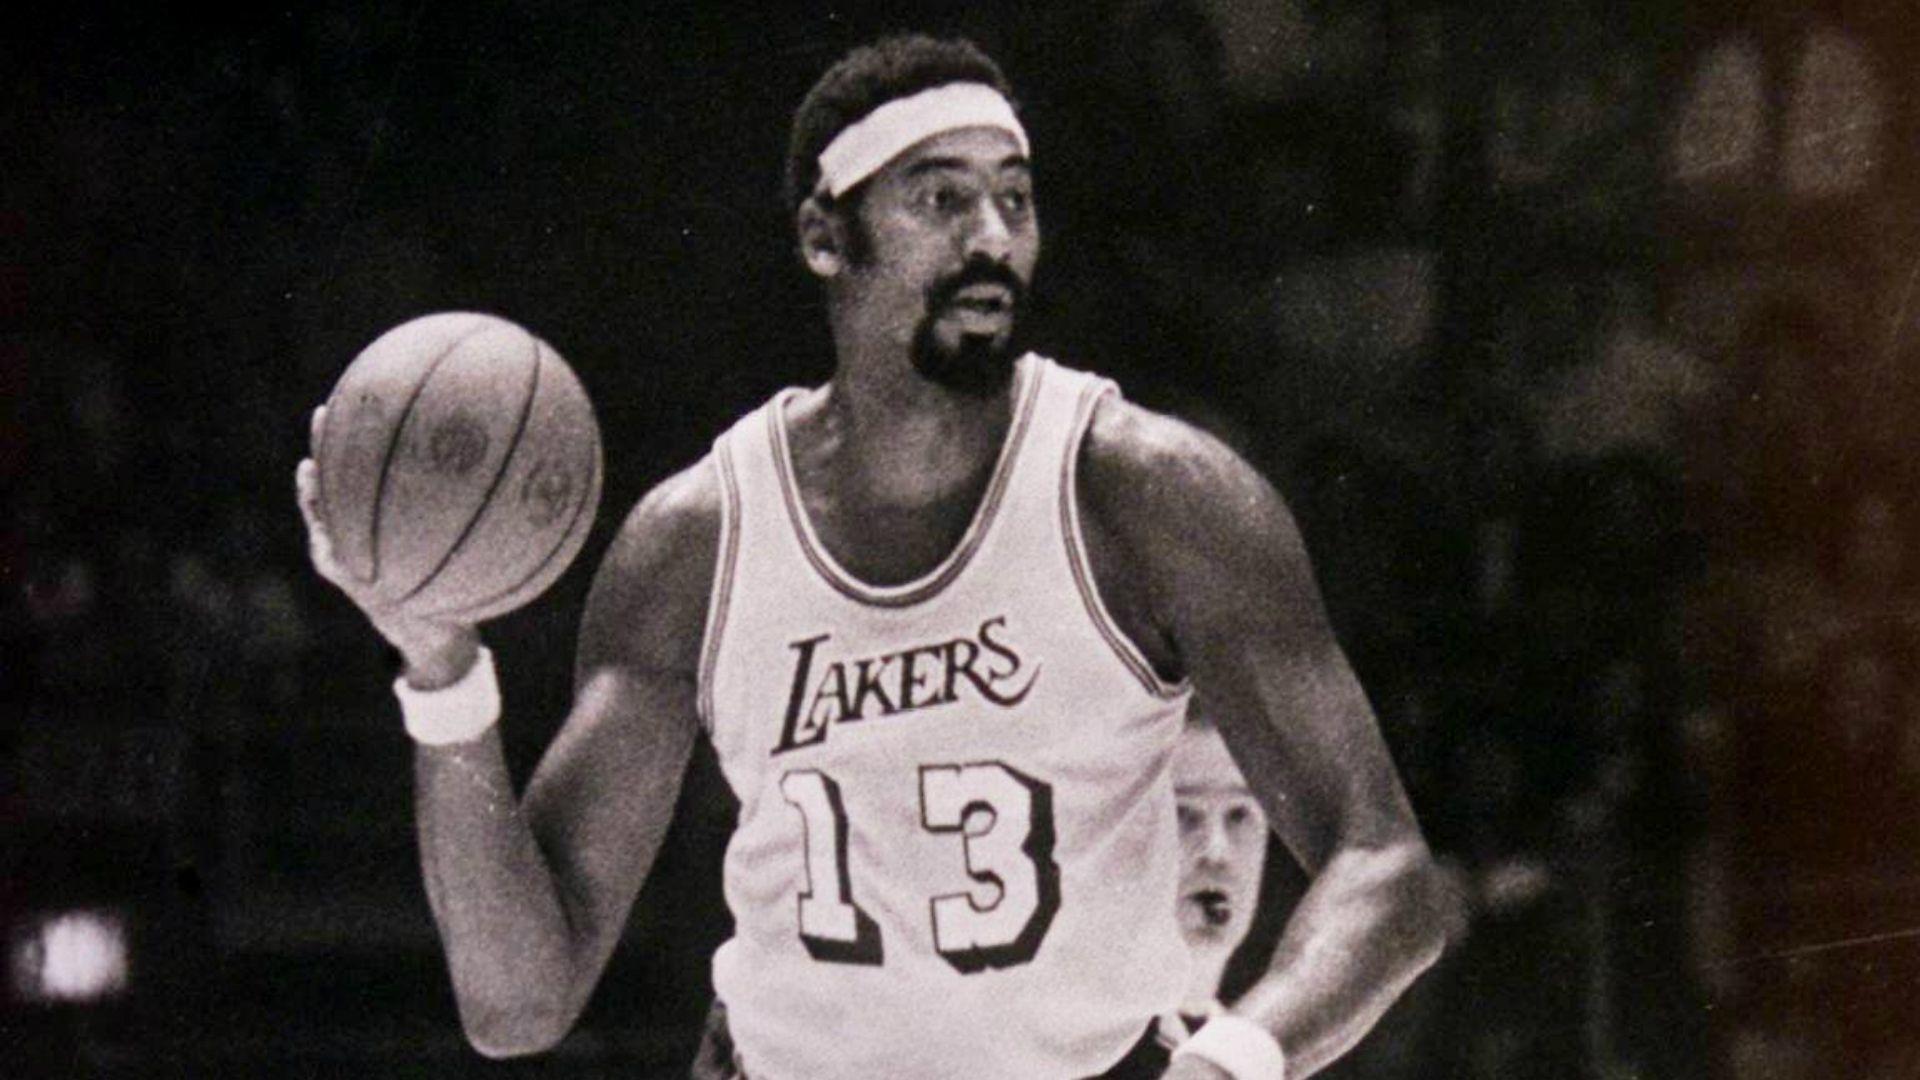 Here's how Wilt Chamberlain once scored zero points in an NBA game